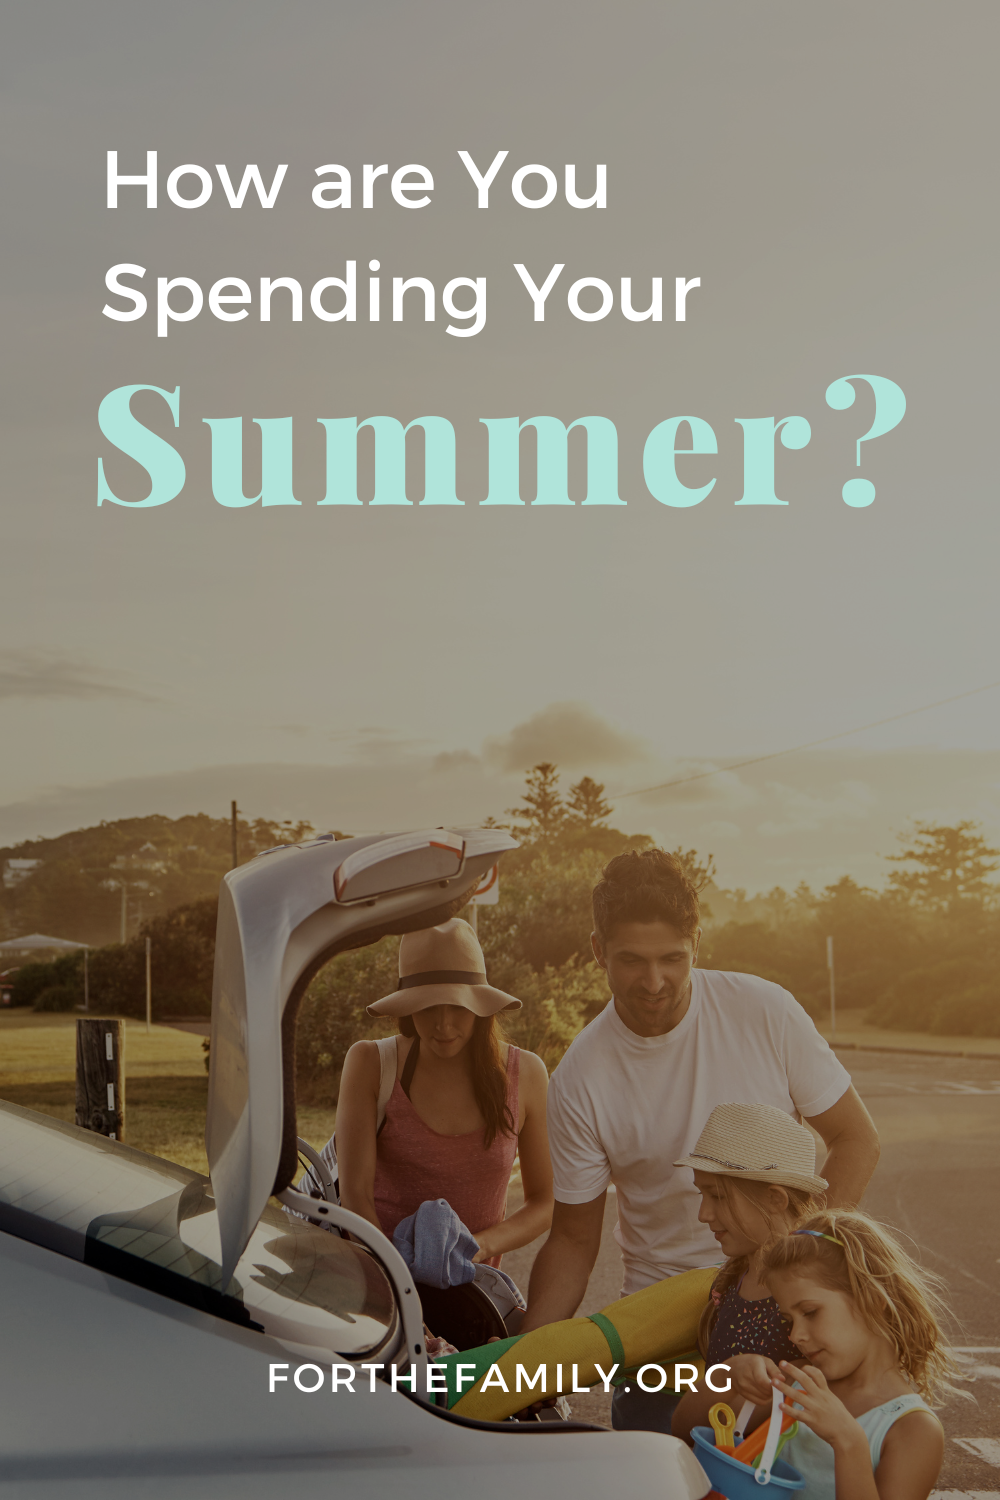 "Isn't summer great?" A question that can easily change your mindset on summer. How are you spending your time with your kids? Just trying to rush through the days, or truly enjoy your time with them? Here are some helpful tips to really love summer and the extra time you can spend with your family.